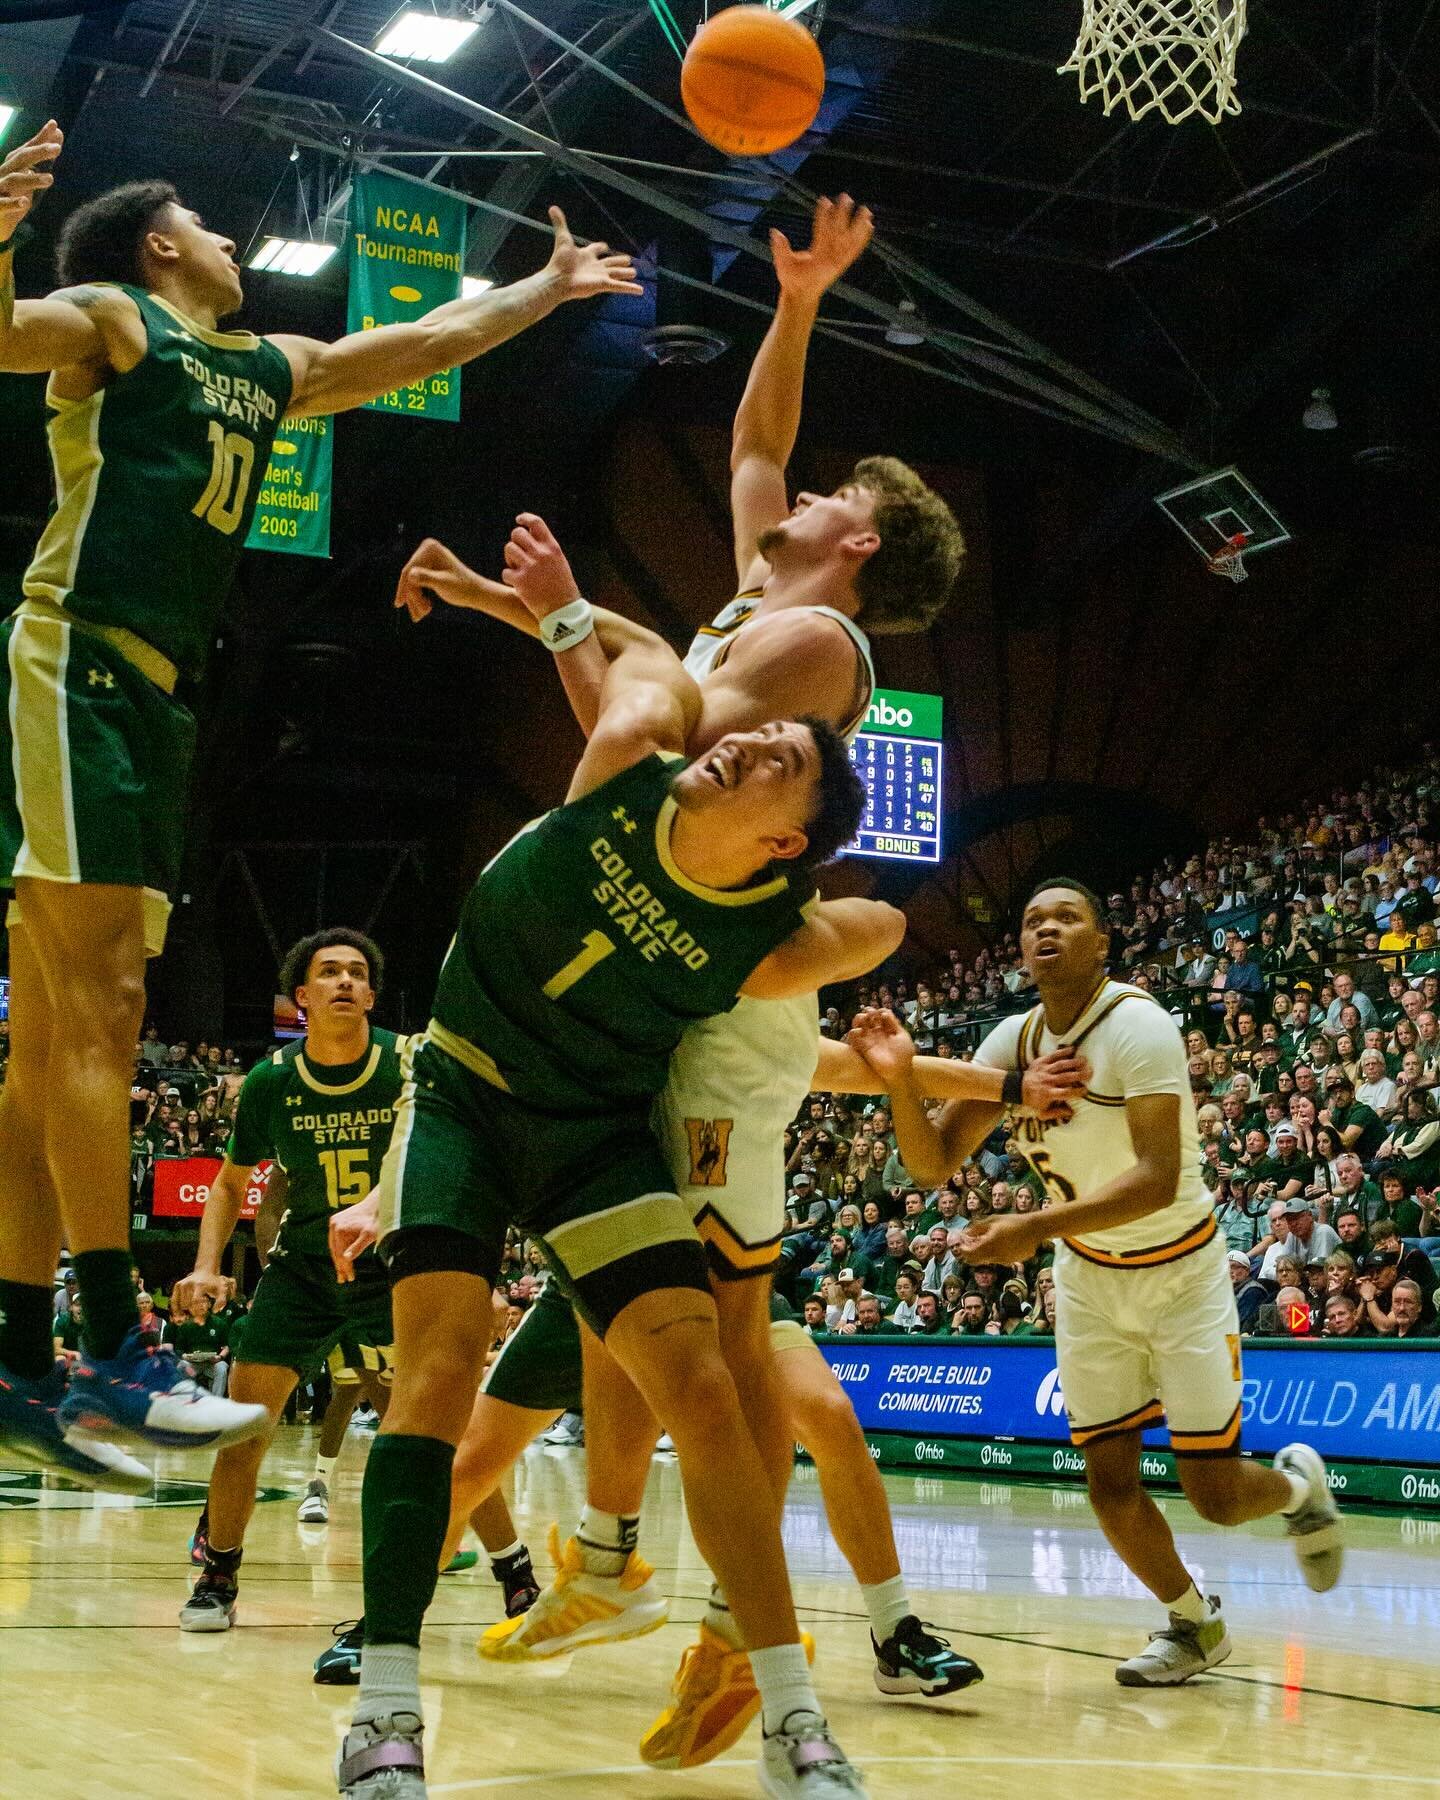 In honor of @csumbasketball facing off against @texasmbb in first rounds of the NCAA, here&rsquo;s some photos from the CSU v. wyoming border war!

GOOD LUCK RAMS!!🤞🐏🏀

Photographed for @csucollegian 

#Stalwart x #CSURams

.
.
.
.
.
🏷️
photo dum